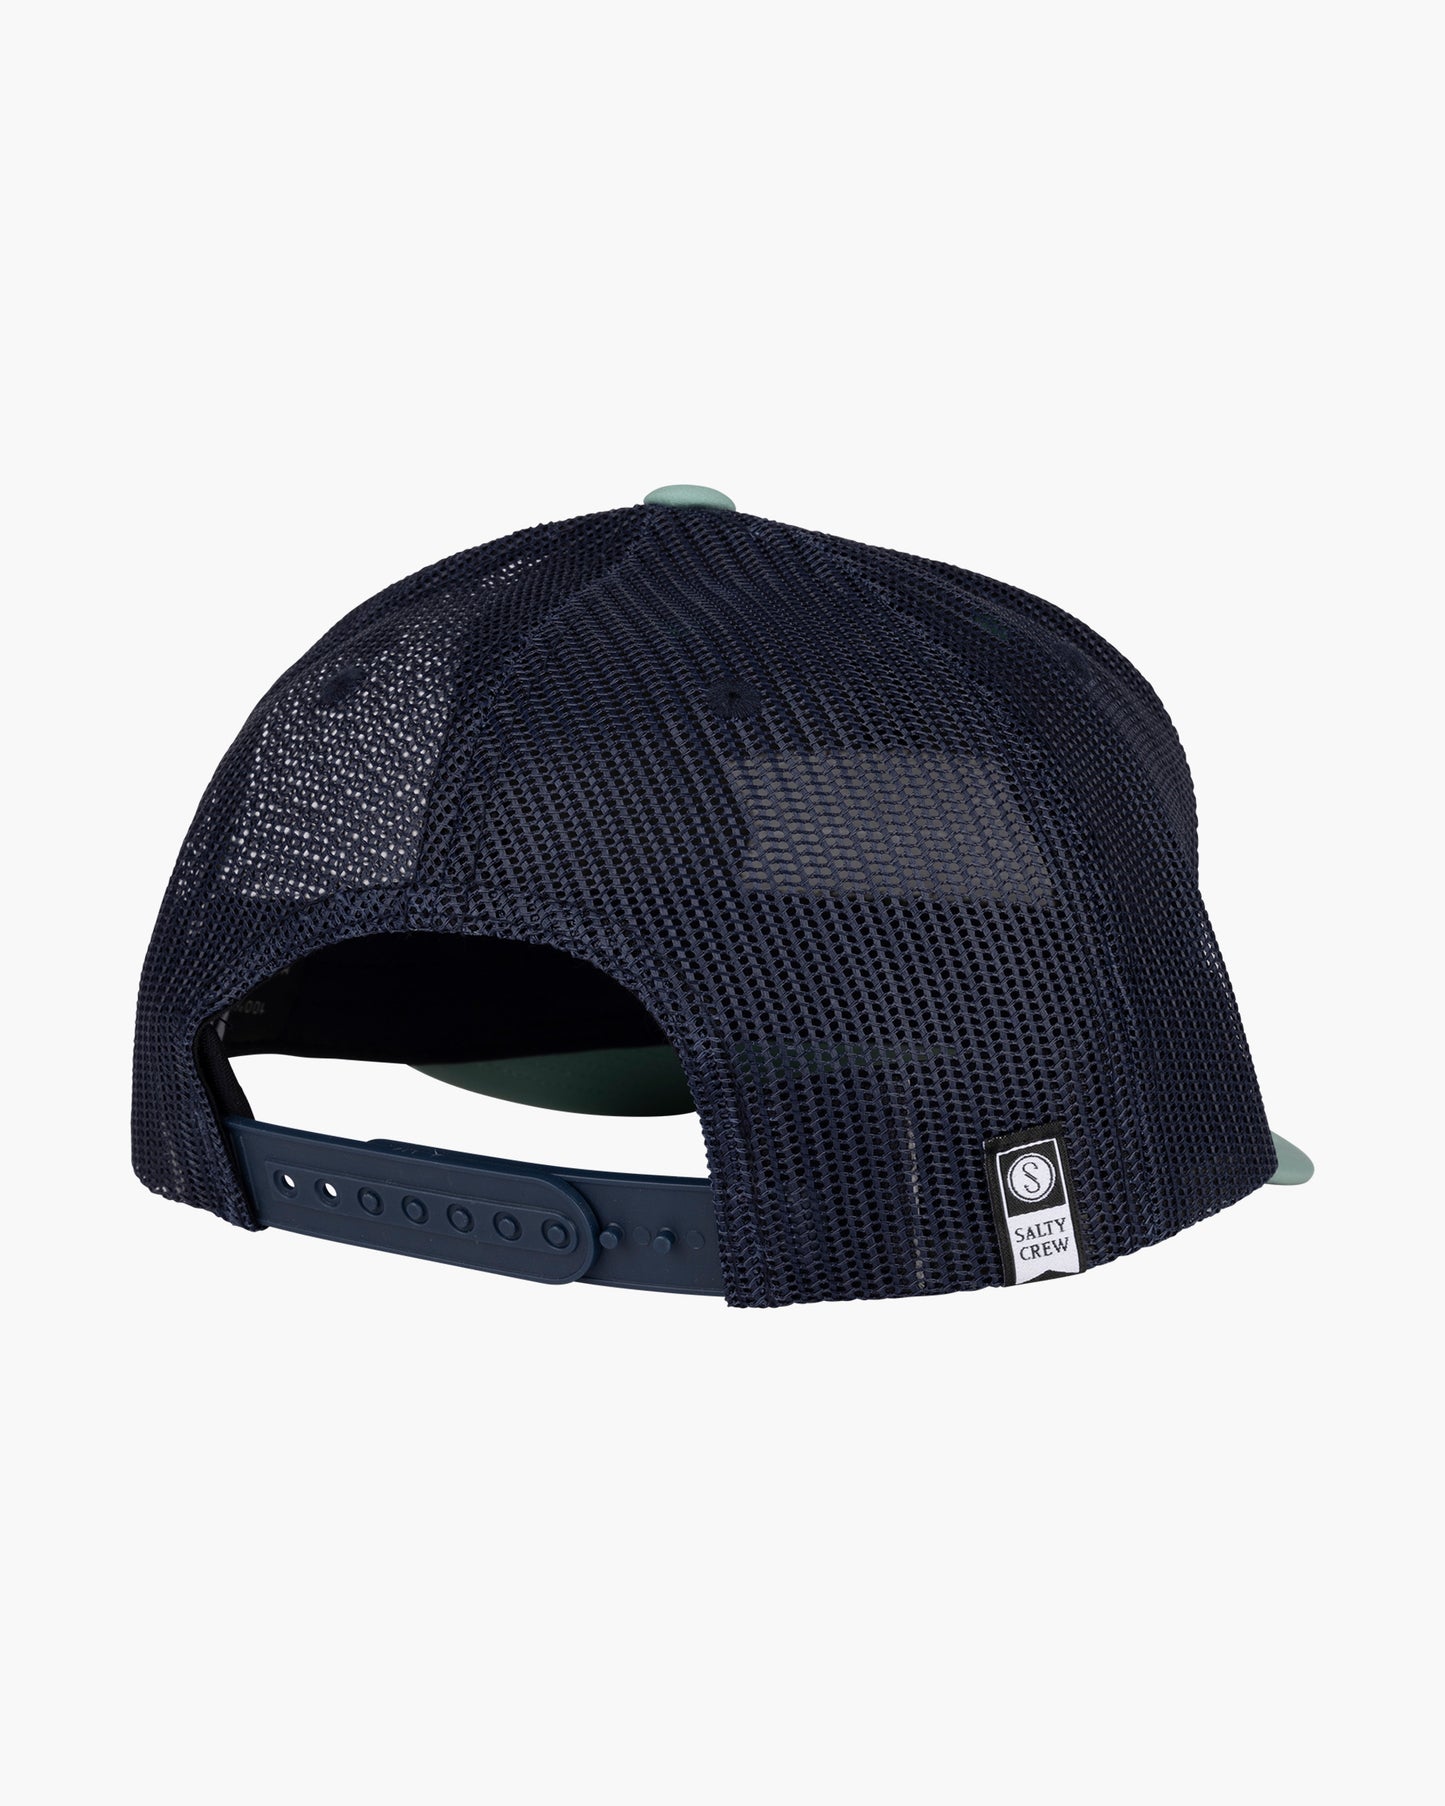 Back of the Pinnacle 2 Spinach/Navy Retro trucker